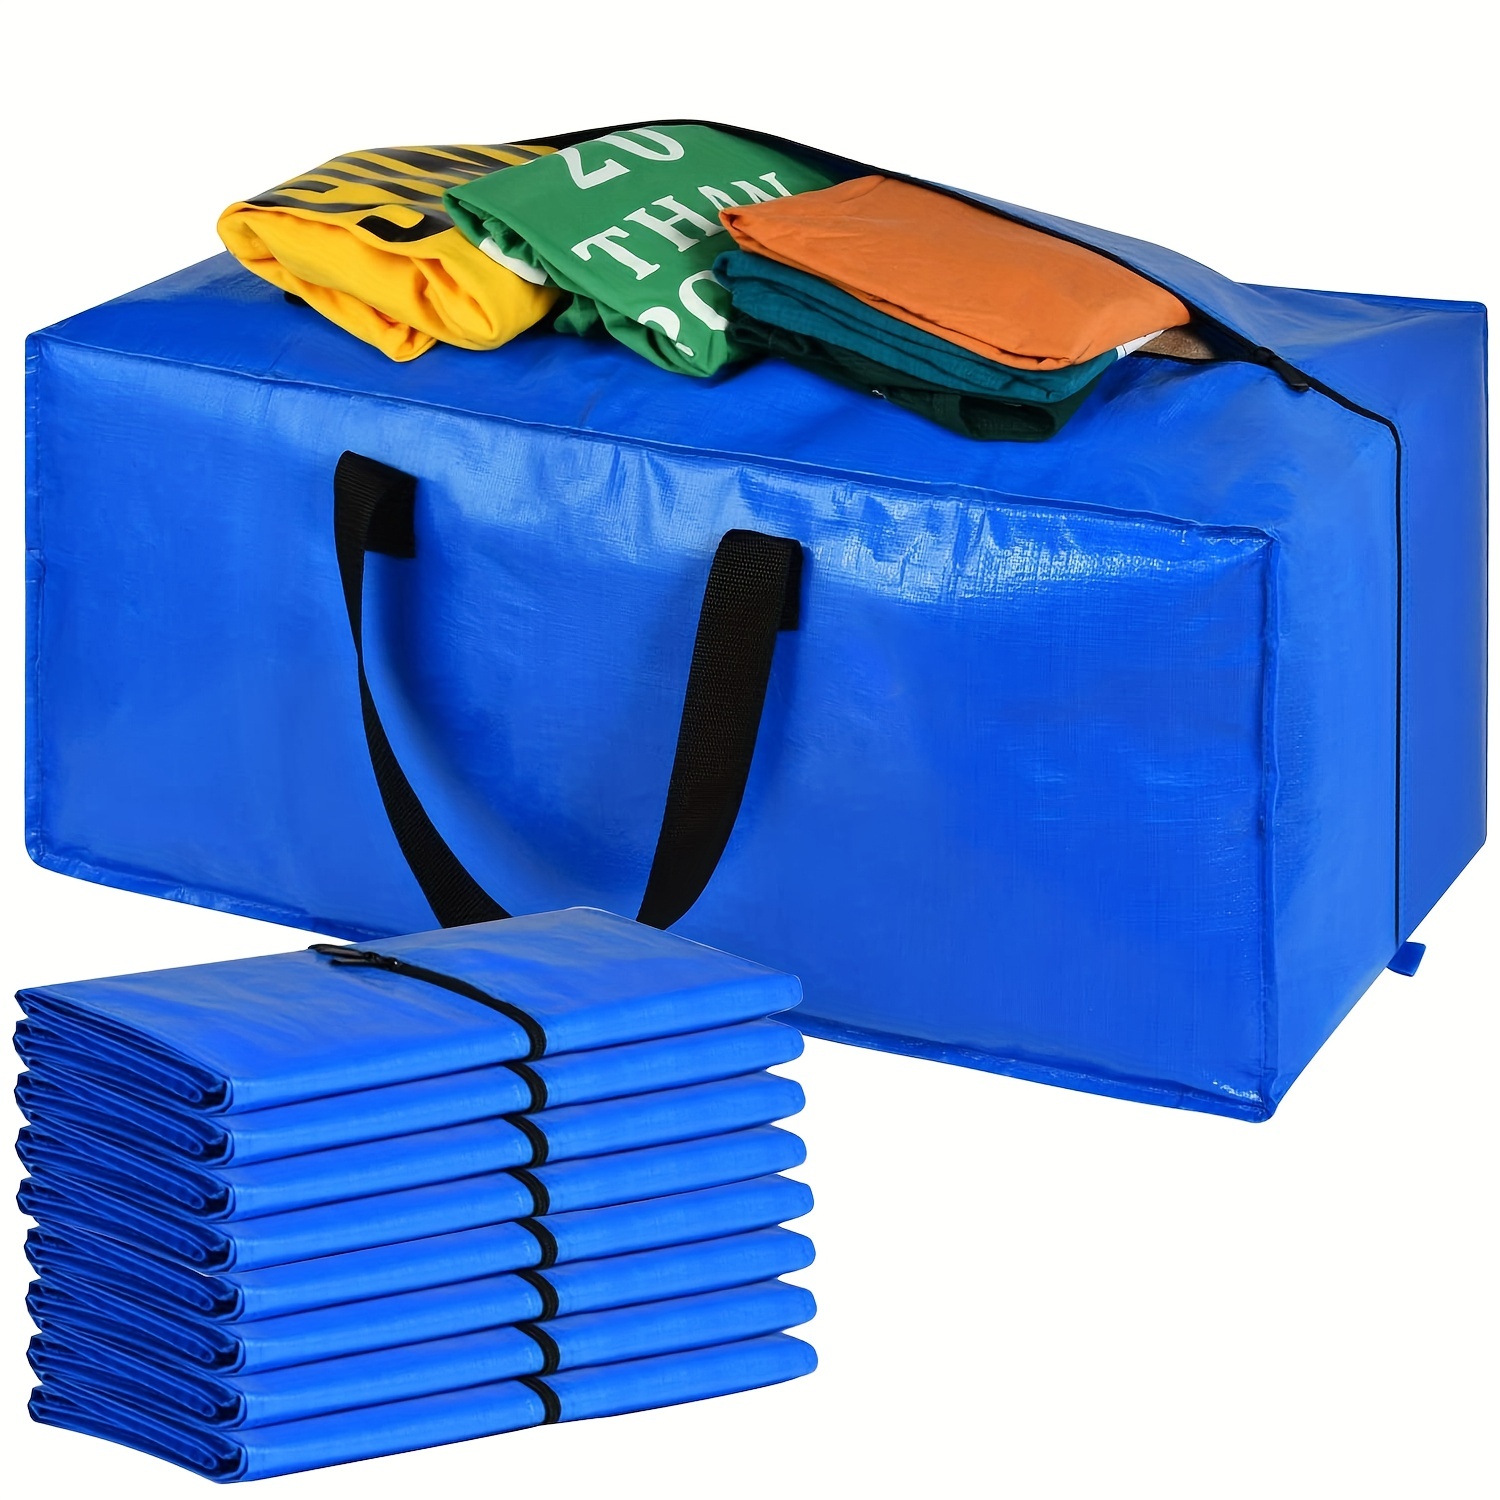  Extra Large Moving Bag Collapsible Storage Bins Tote